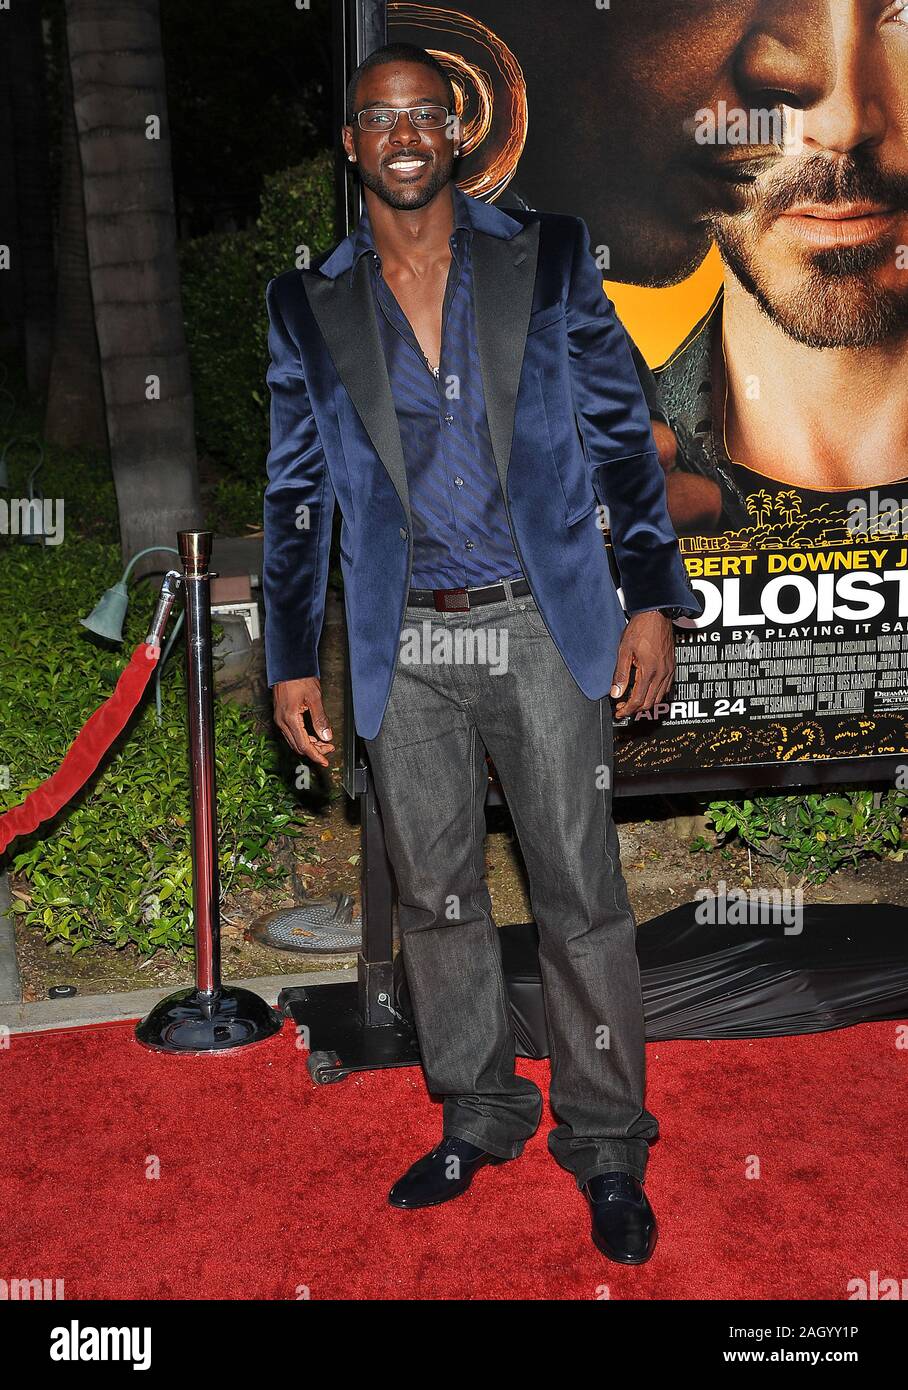 - The Soloist Premiere at the Paramount Theatre in Los Angeles.GrossLance 75 Red Carpet Event, Vertical, USA, Film Industry, Celebrities,  Photography Stock Photo